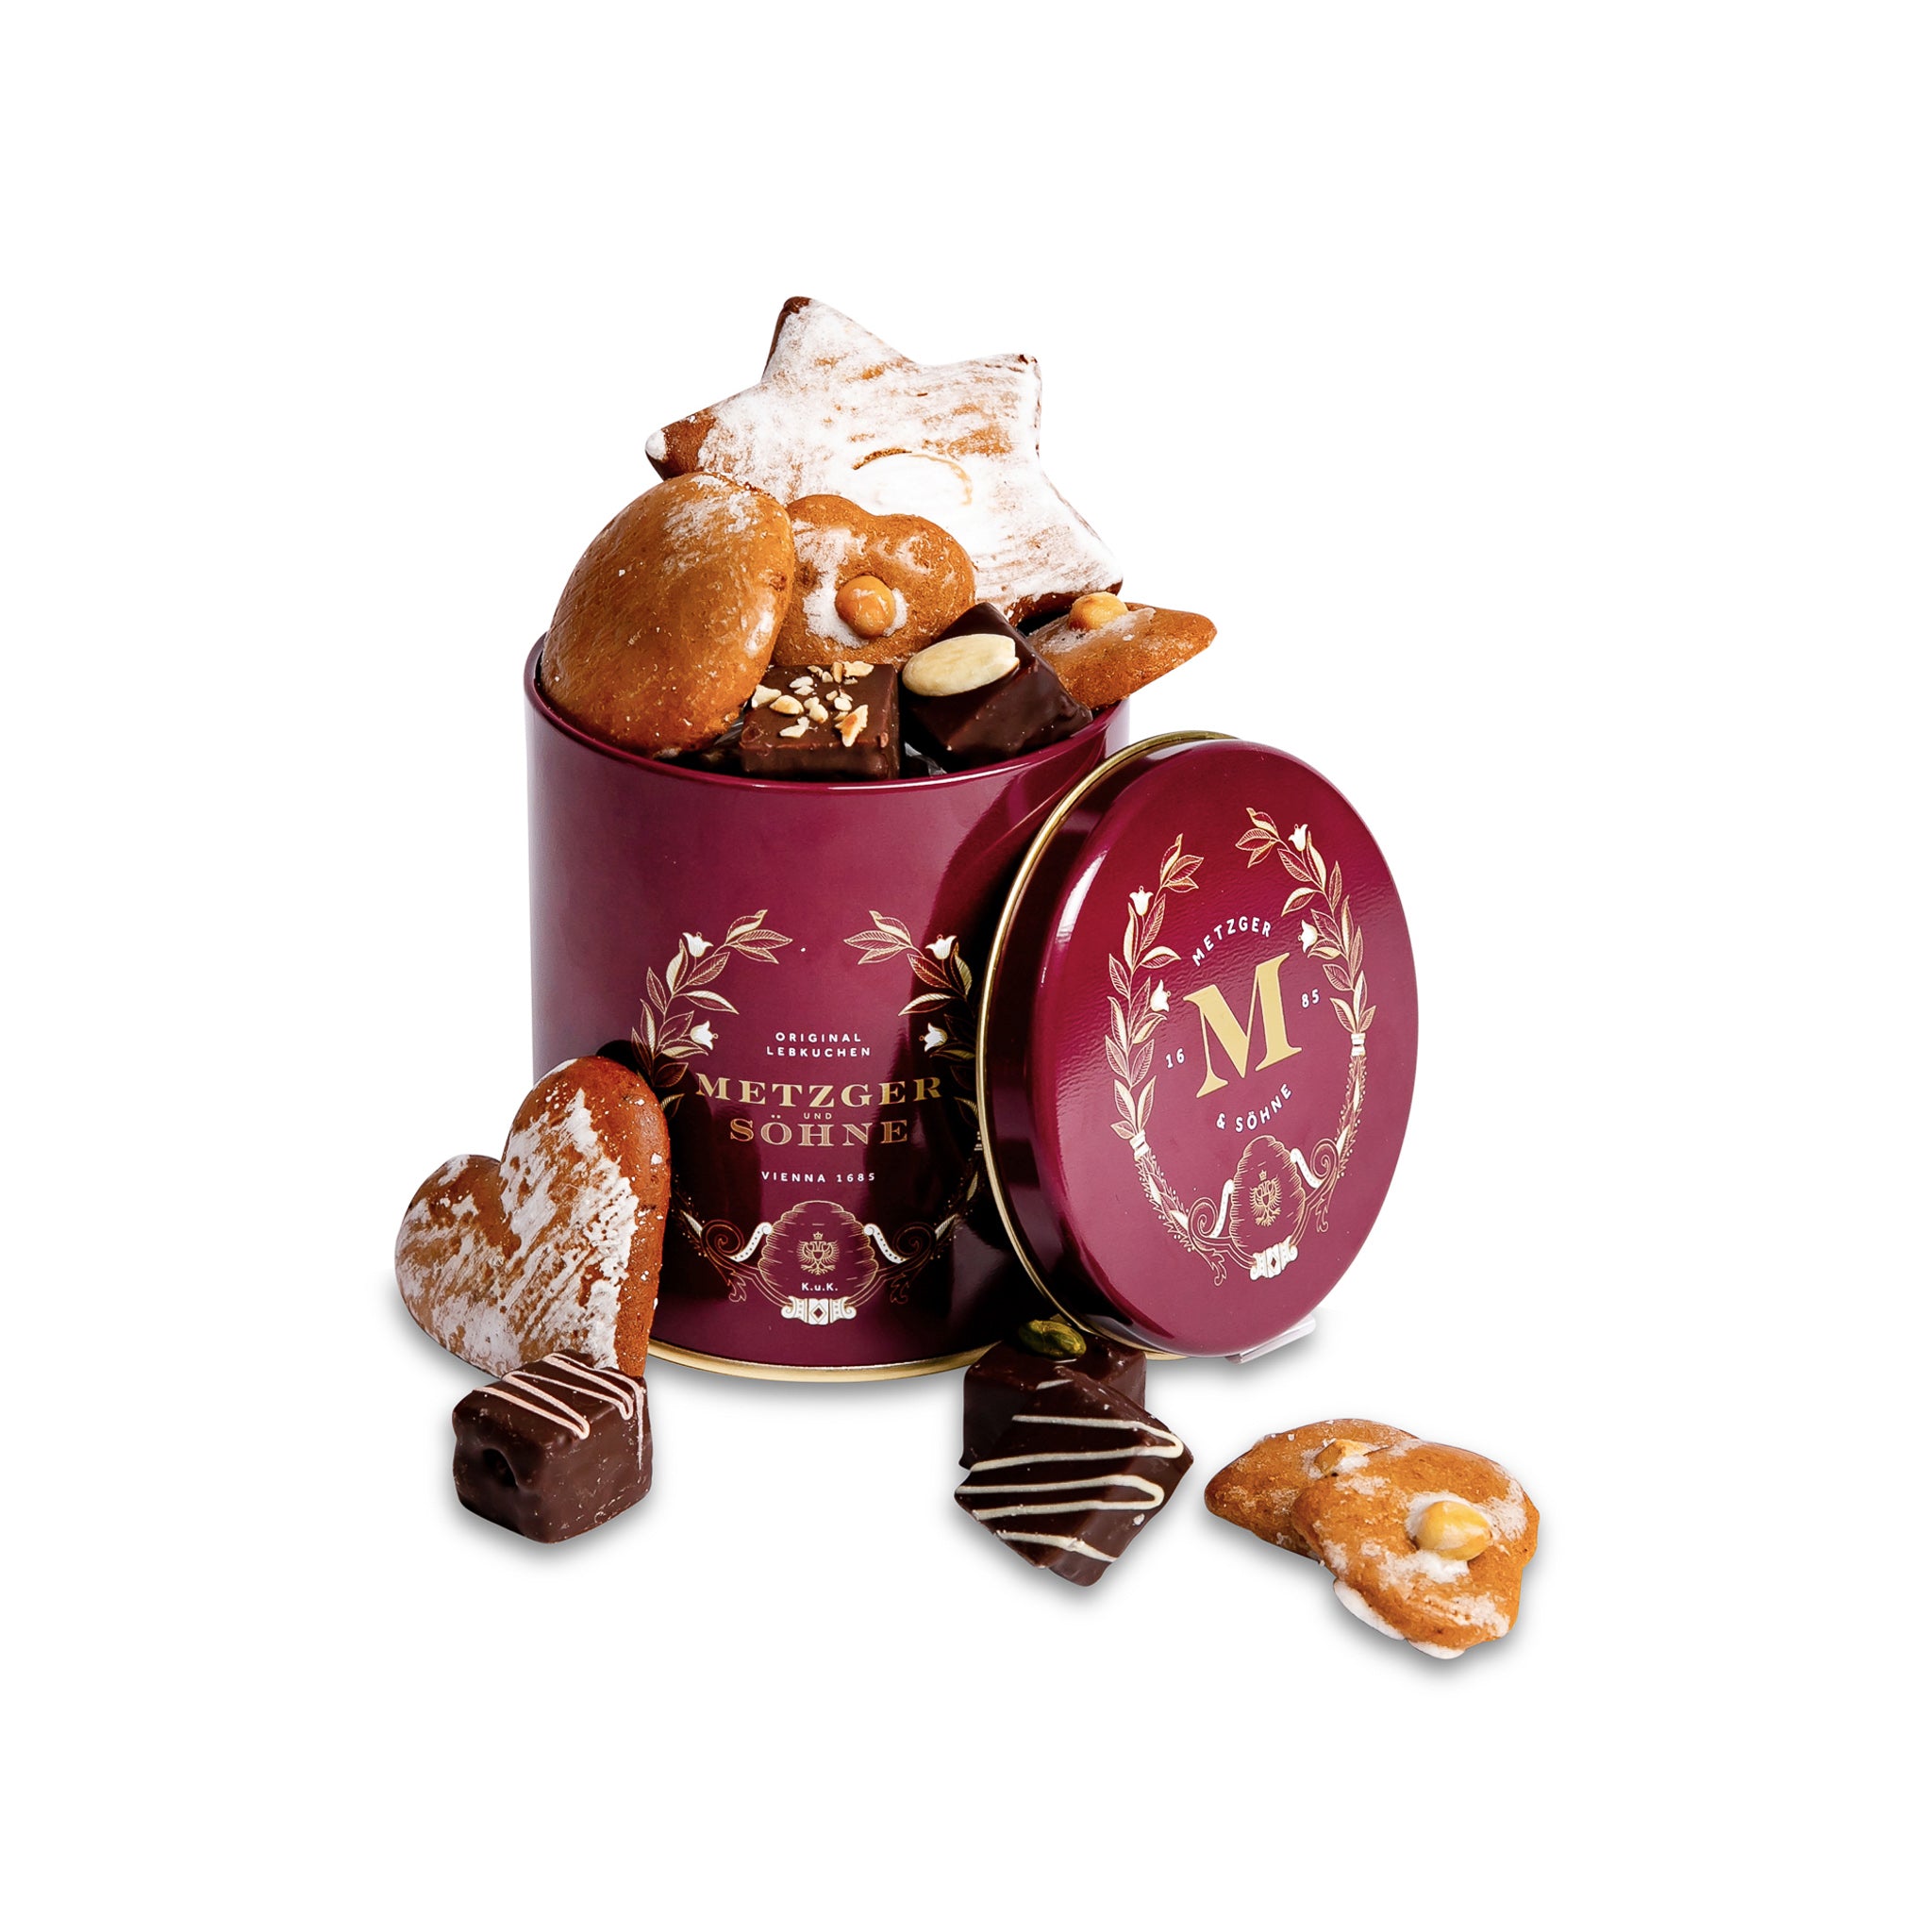 This Metzger & Söhne signaturetin is filled with a cross-section of the most popular varieties from the original Metzger Lebkuchen  range.